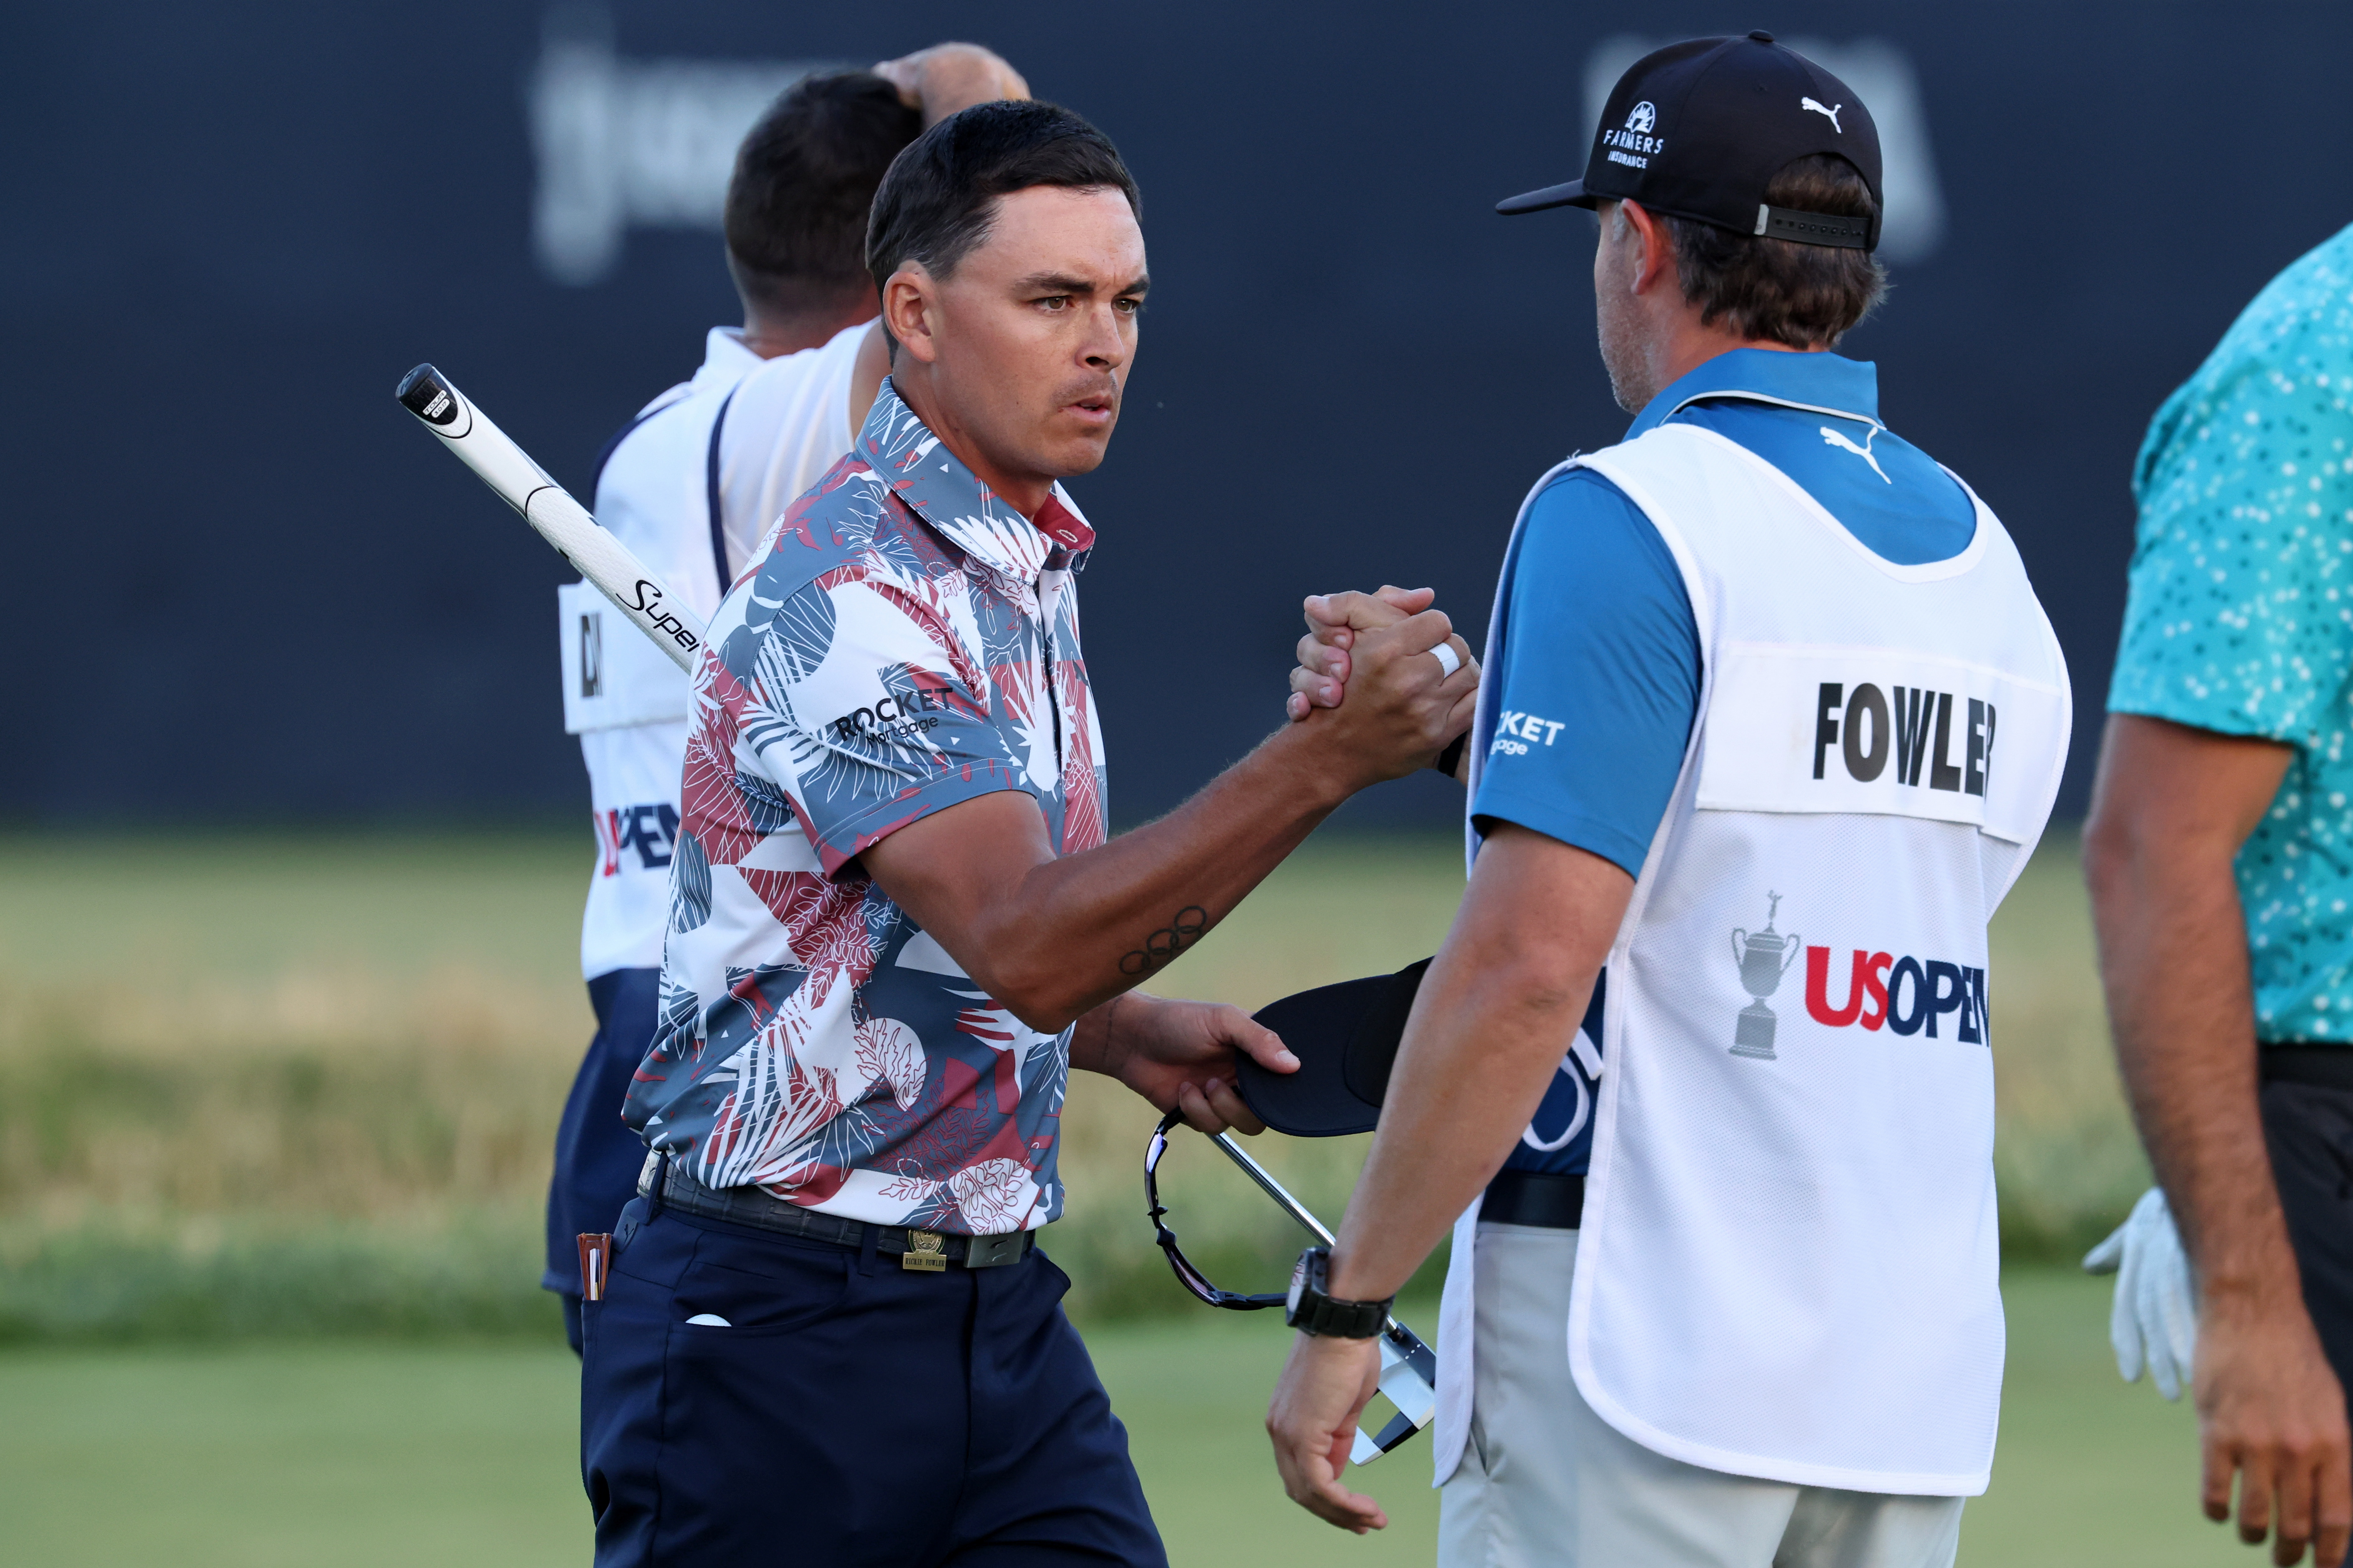 Rickie Fowler and his caddie Ricky Romano shake hands on the 18th green after completing the second round of the U.S. Open golf tournament at Los Angeles Country Club.